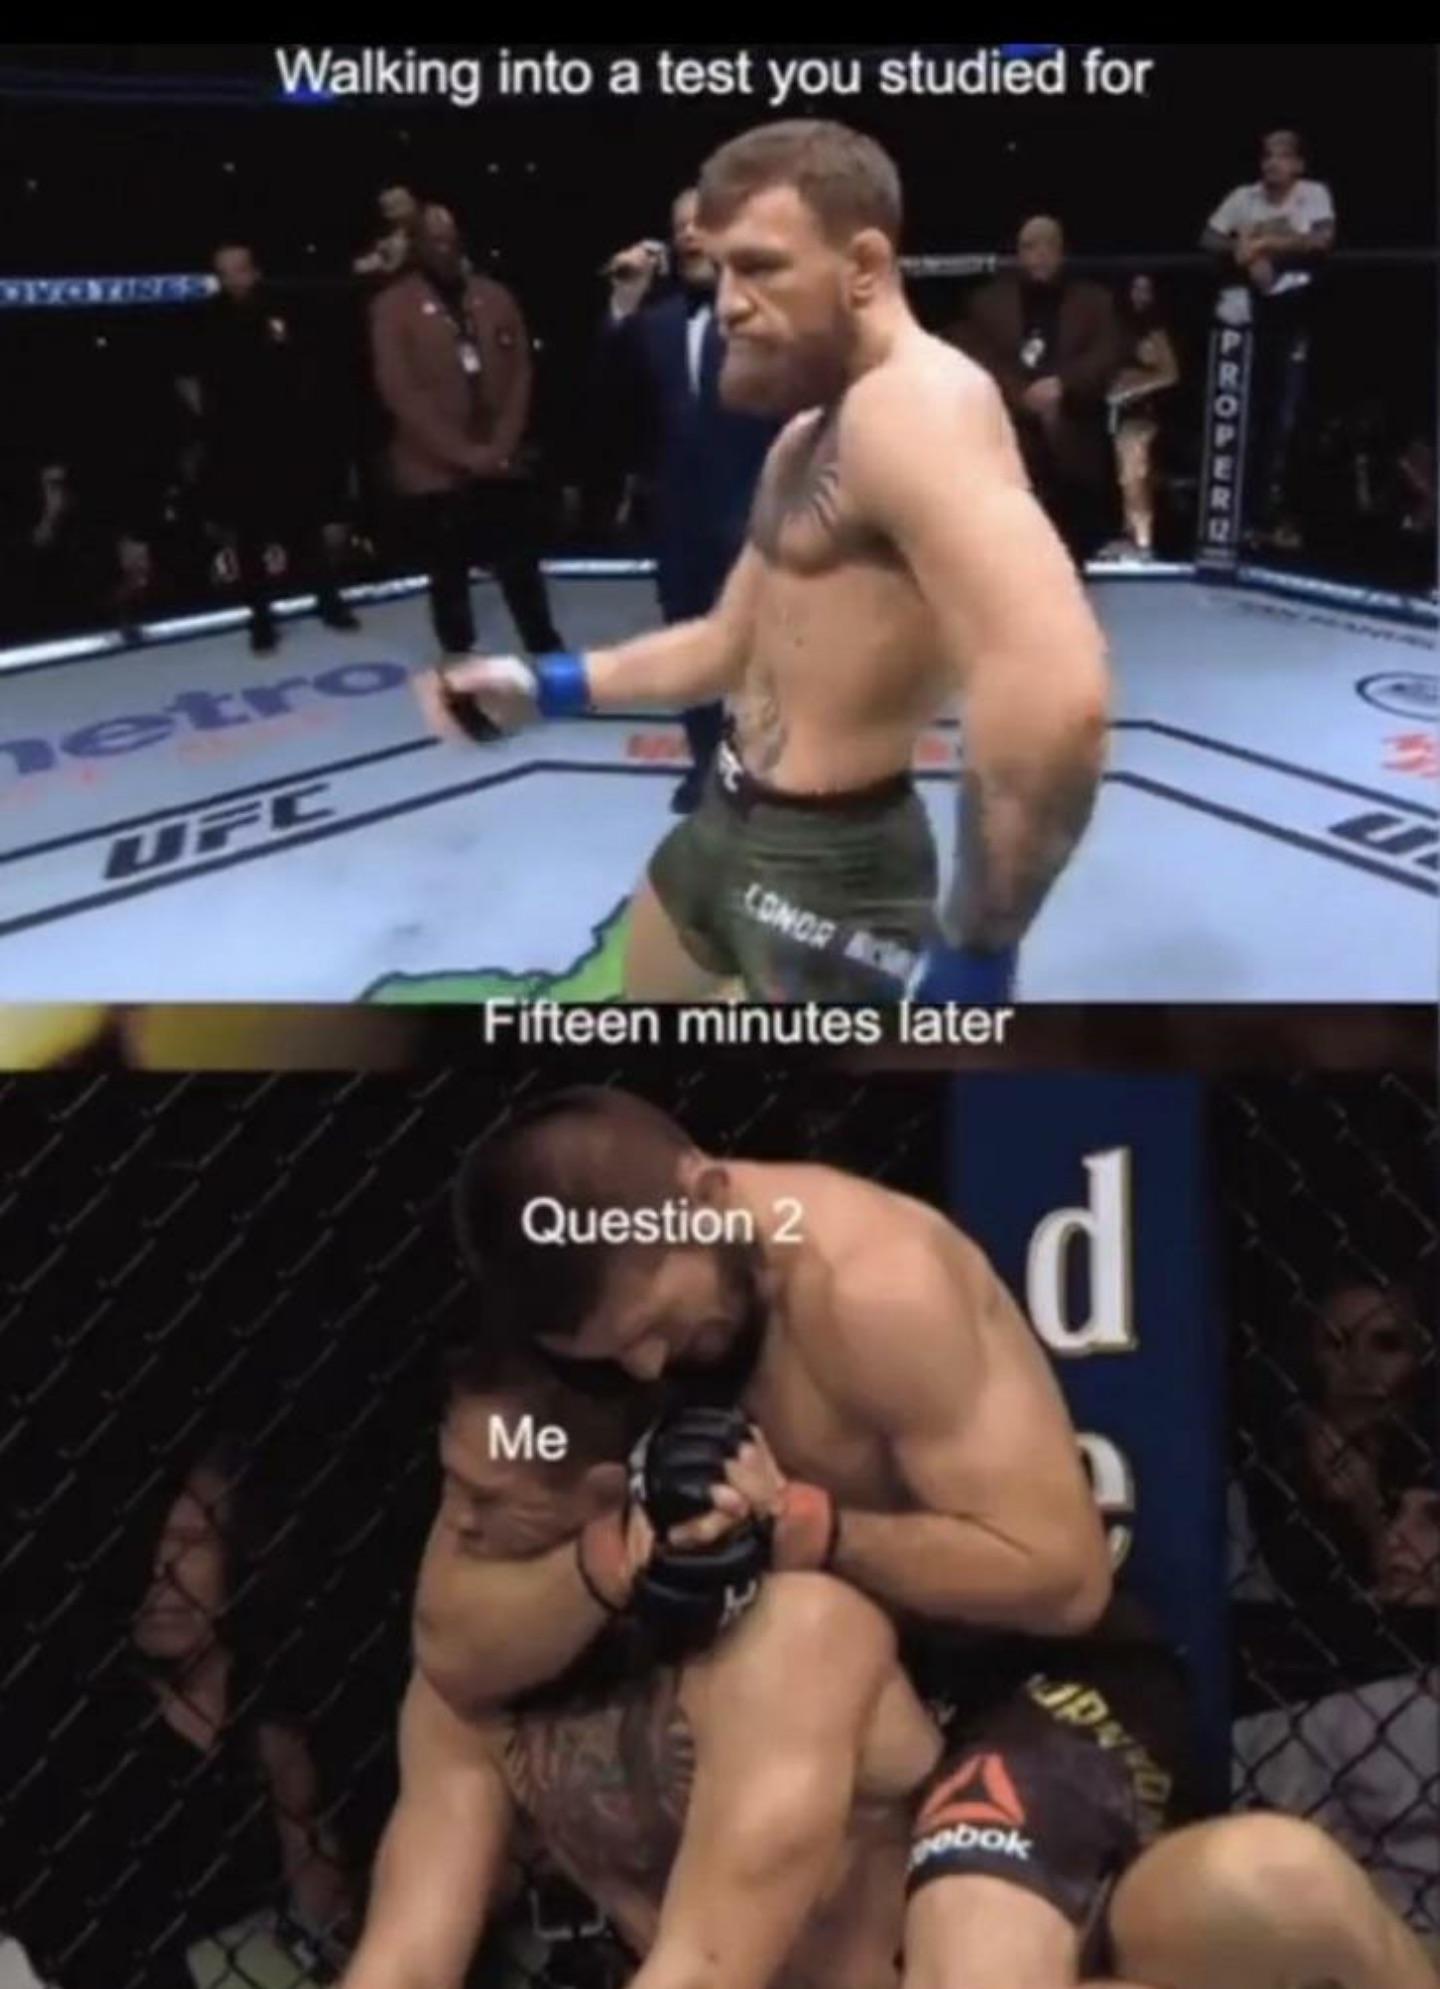 r/collegememes- college dank memes - conor mcgregor exam meme - Walking into a test you studied for Conos Fifteen minutes later Question 2 Me robok